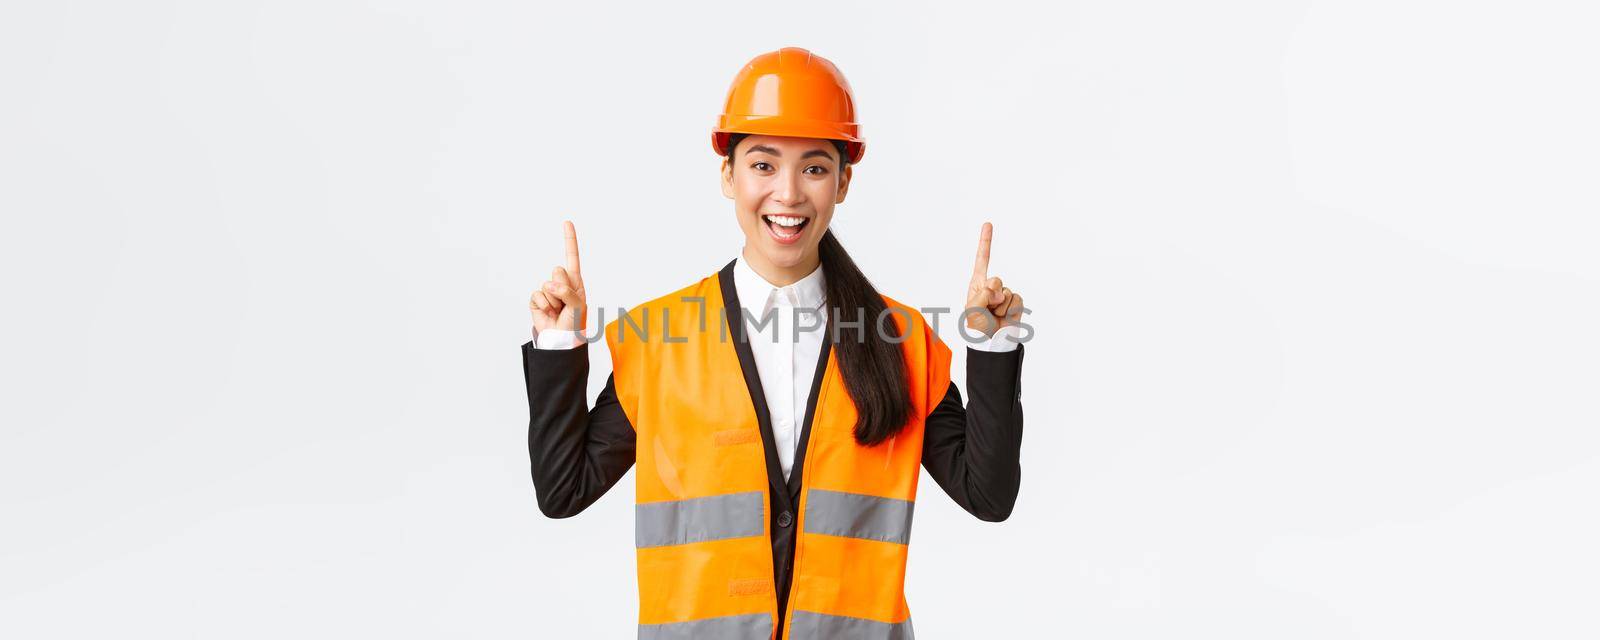 Building, construction and industrial concept. Happy smiling female asian engineer in safety helmet and reflective clothing, introduce new object, estate for sale. Architect pointing fingers up.